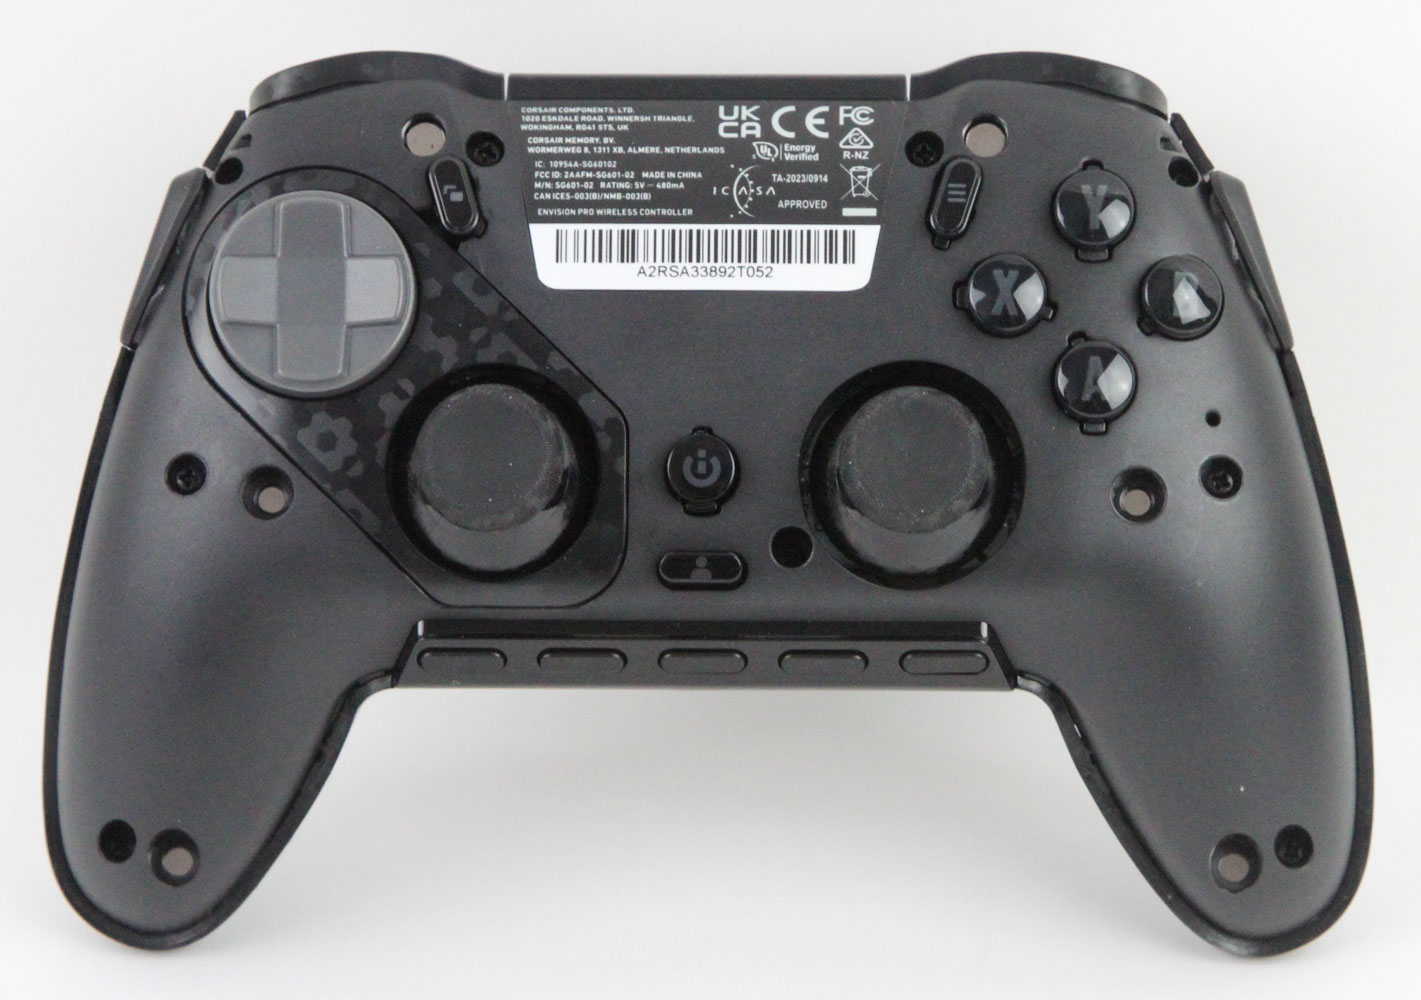 Scuf Envision Pro Review - IGN